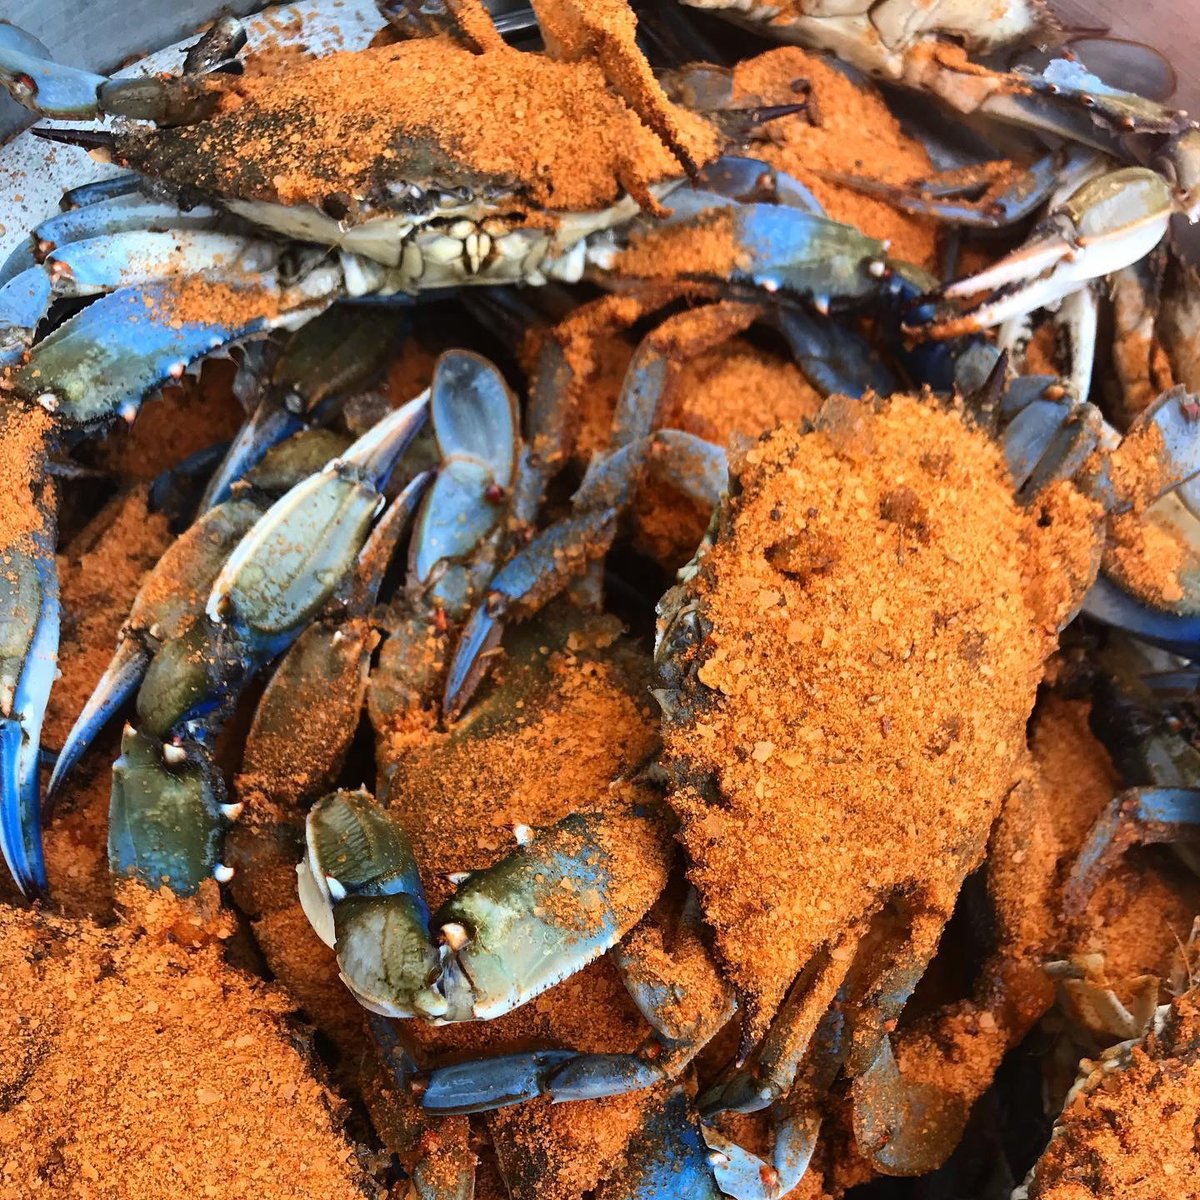 Water you doing this Weekend 🤣 Crackin Crabs CARRYOUT CRAB PRICES Males Small $45 Dz Medium $65 Dz Large $95 Dz Xlg $125 Dz Jumbo $150 dz EAT IN CRAB PRICES Sm- $50 Dz Med- $80 Dz Large- $110 Dz Xlg- $150 Dz Jumbo- $180 Dz HOURS Mon- Thurs 11-9 Fri- Sat 11-10 Sun 11...